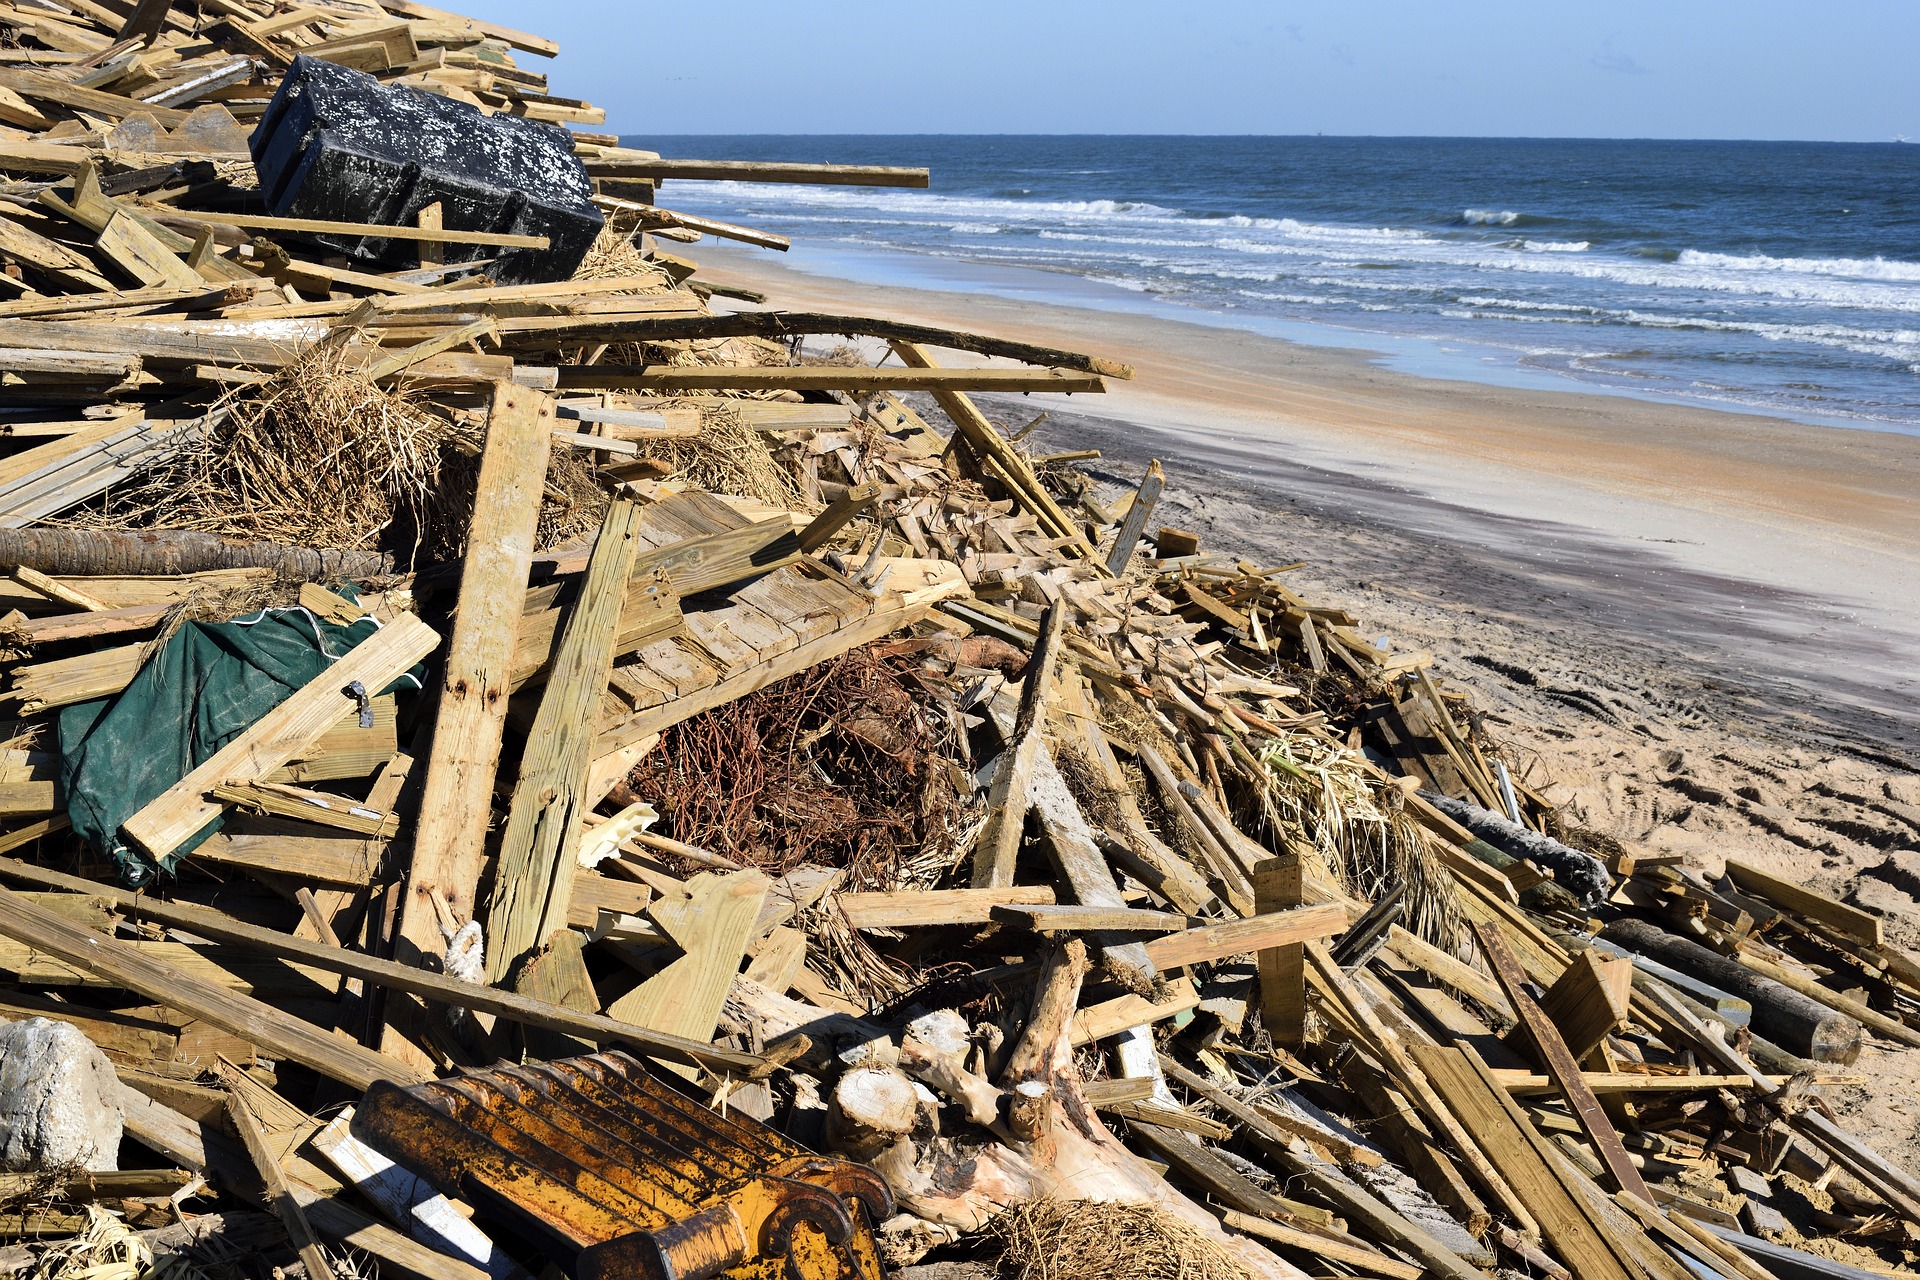 Hurricane debris piled up on a beach, with the ocean in the background.